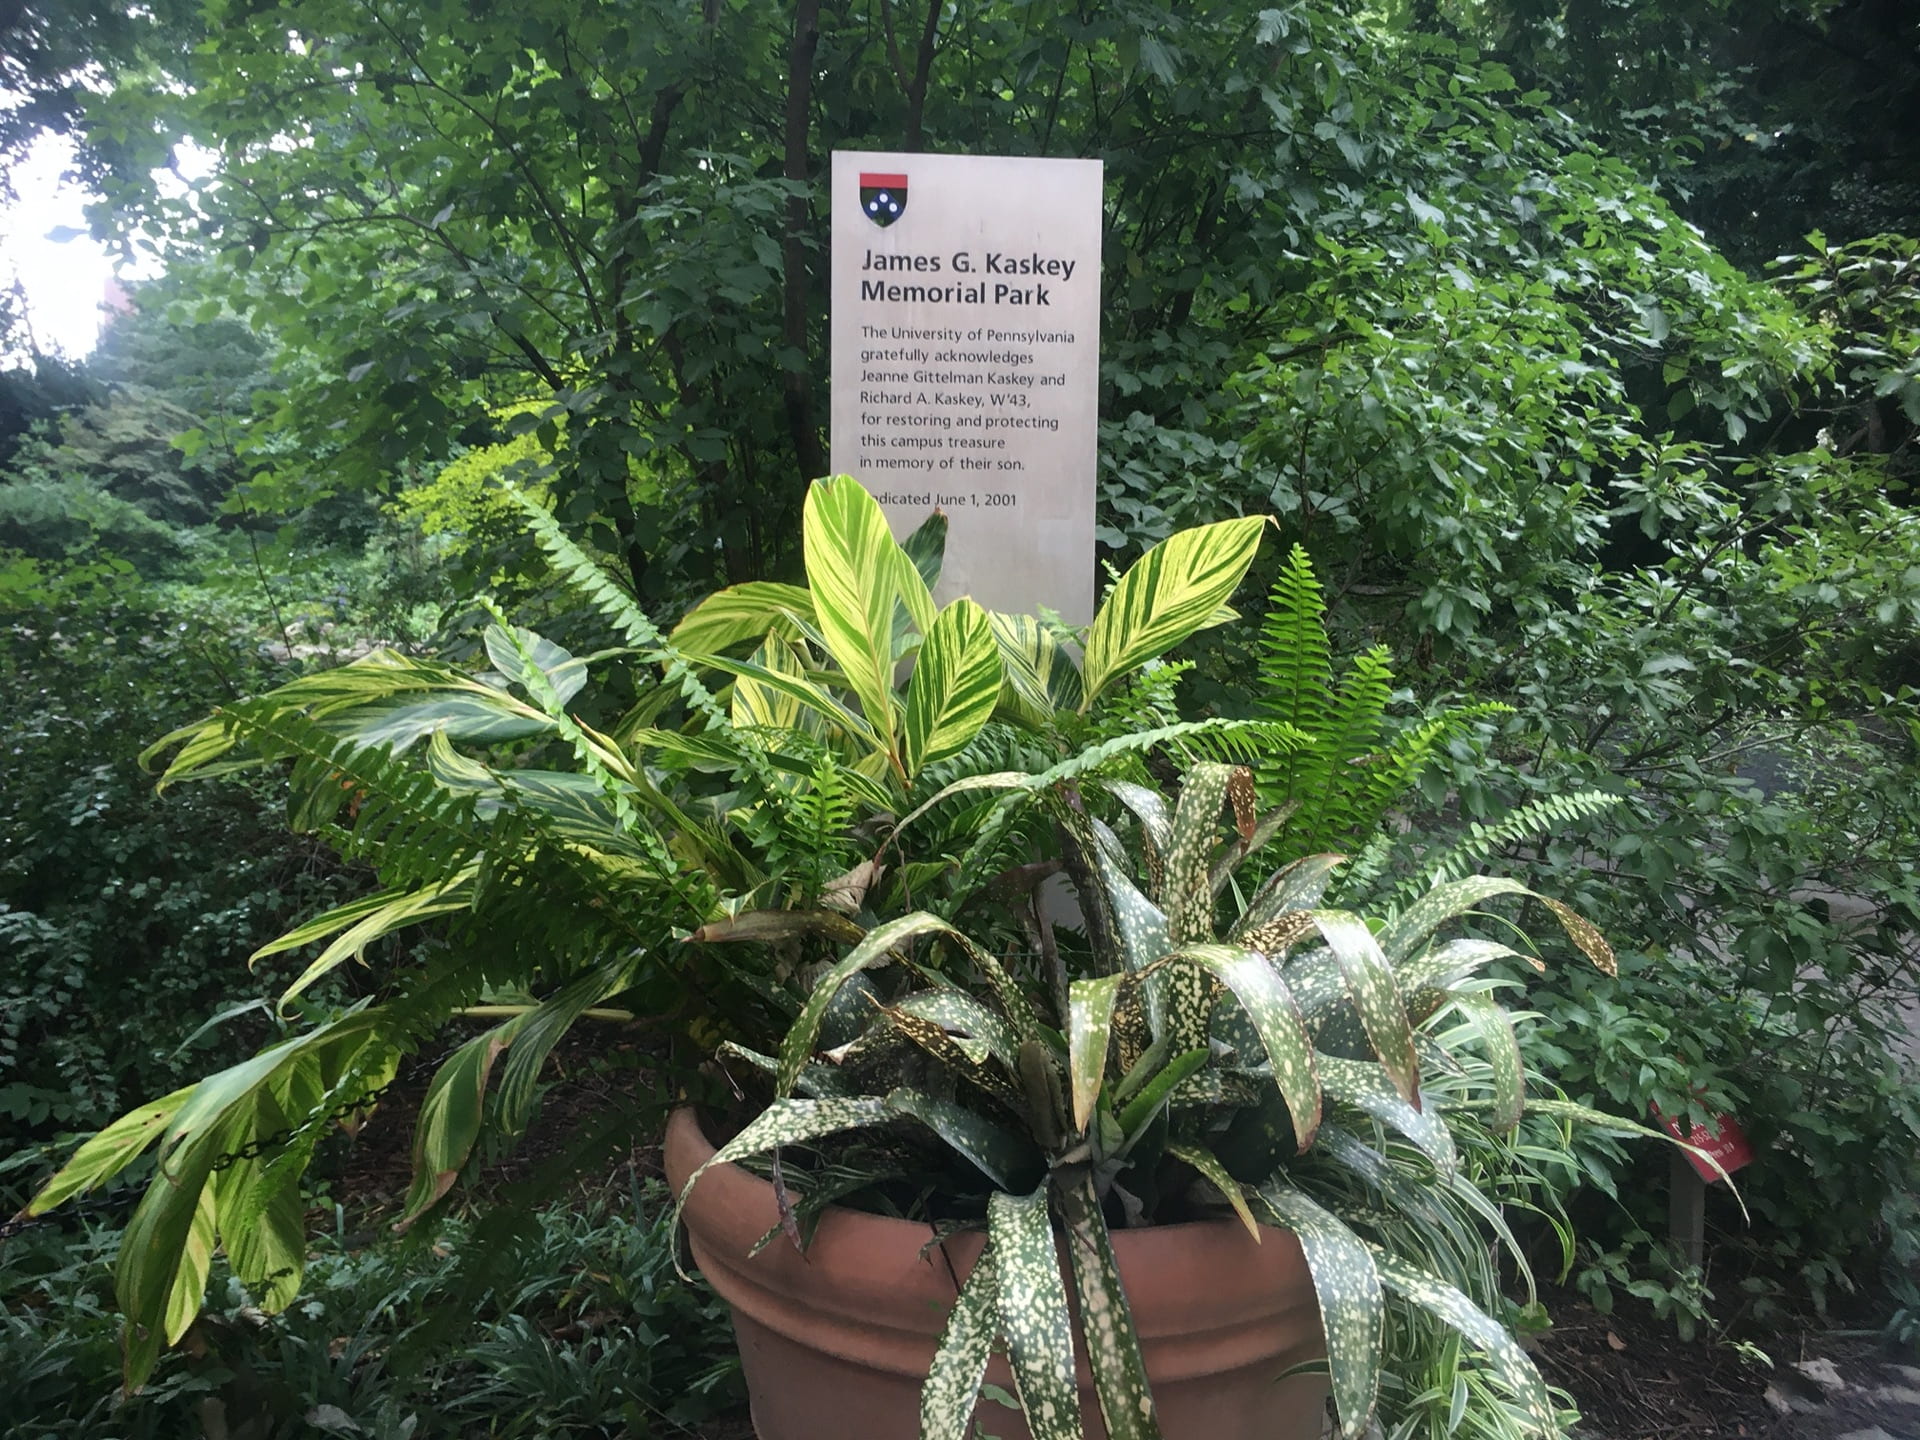 A tropical container display at the entrance to the Pond.